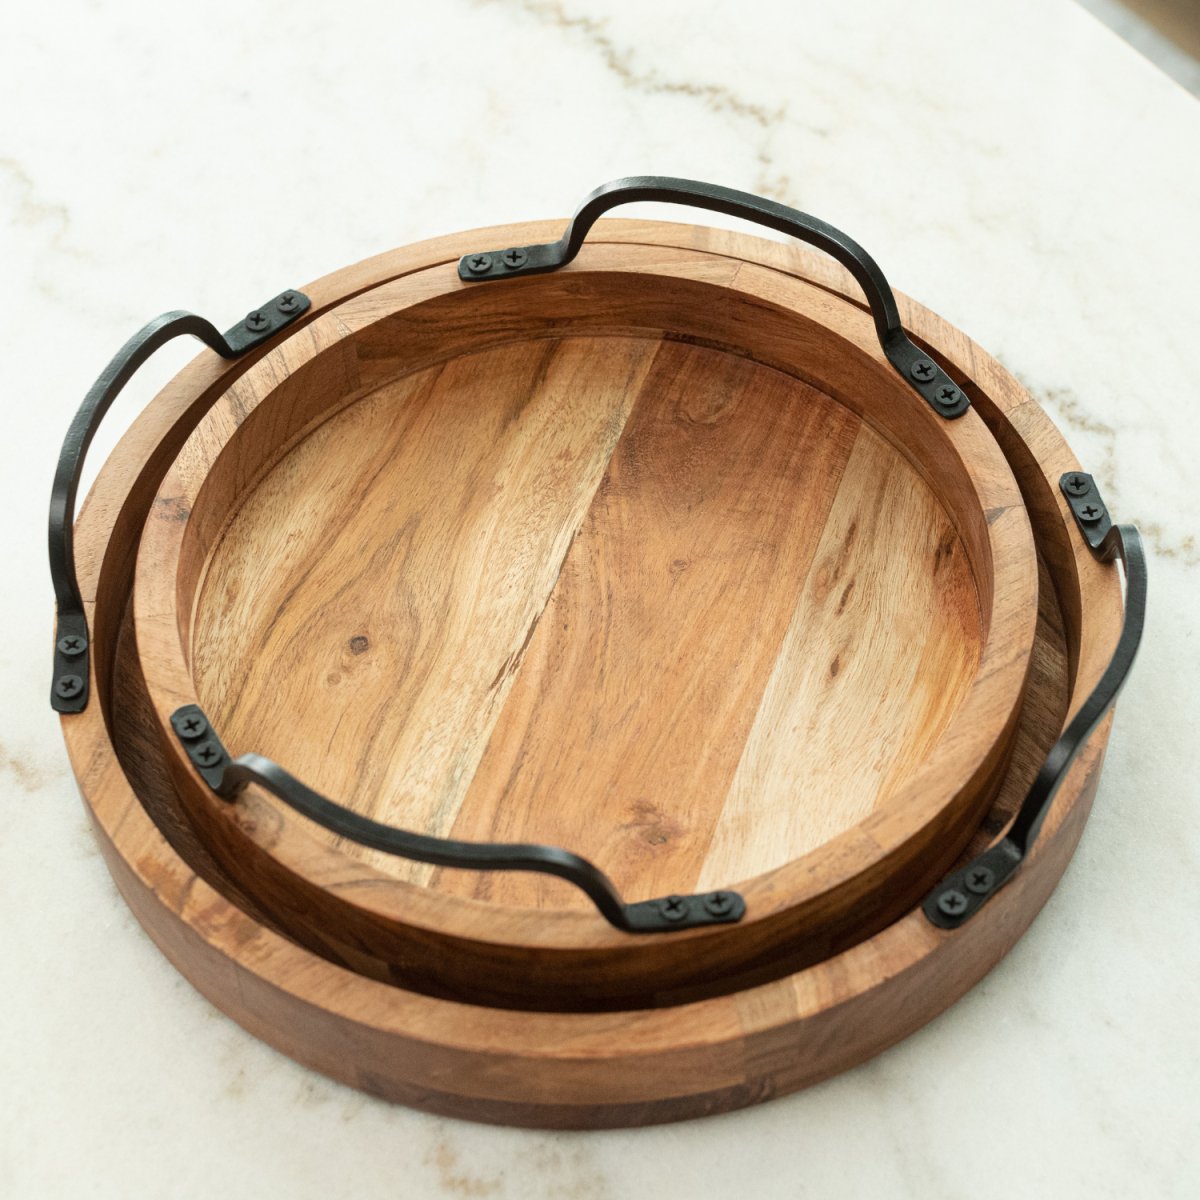 Round Wooden Serving Trays with Black Metal Handles, set of 2 nesting into each other image - Aesthetic Living